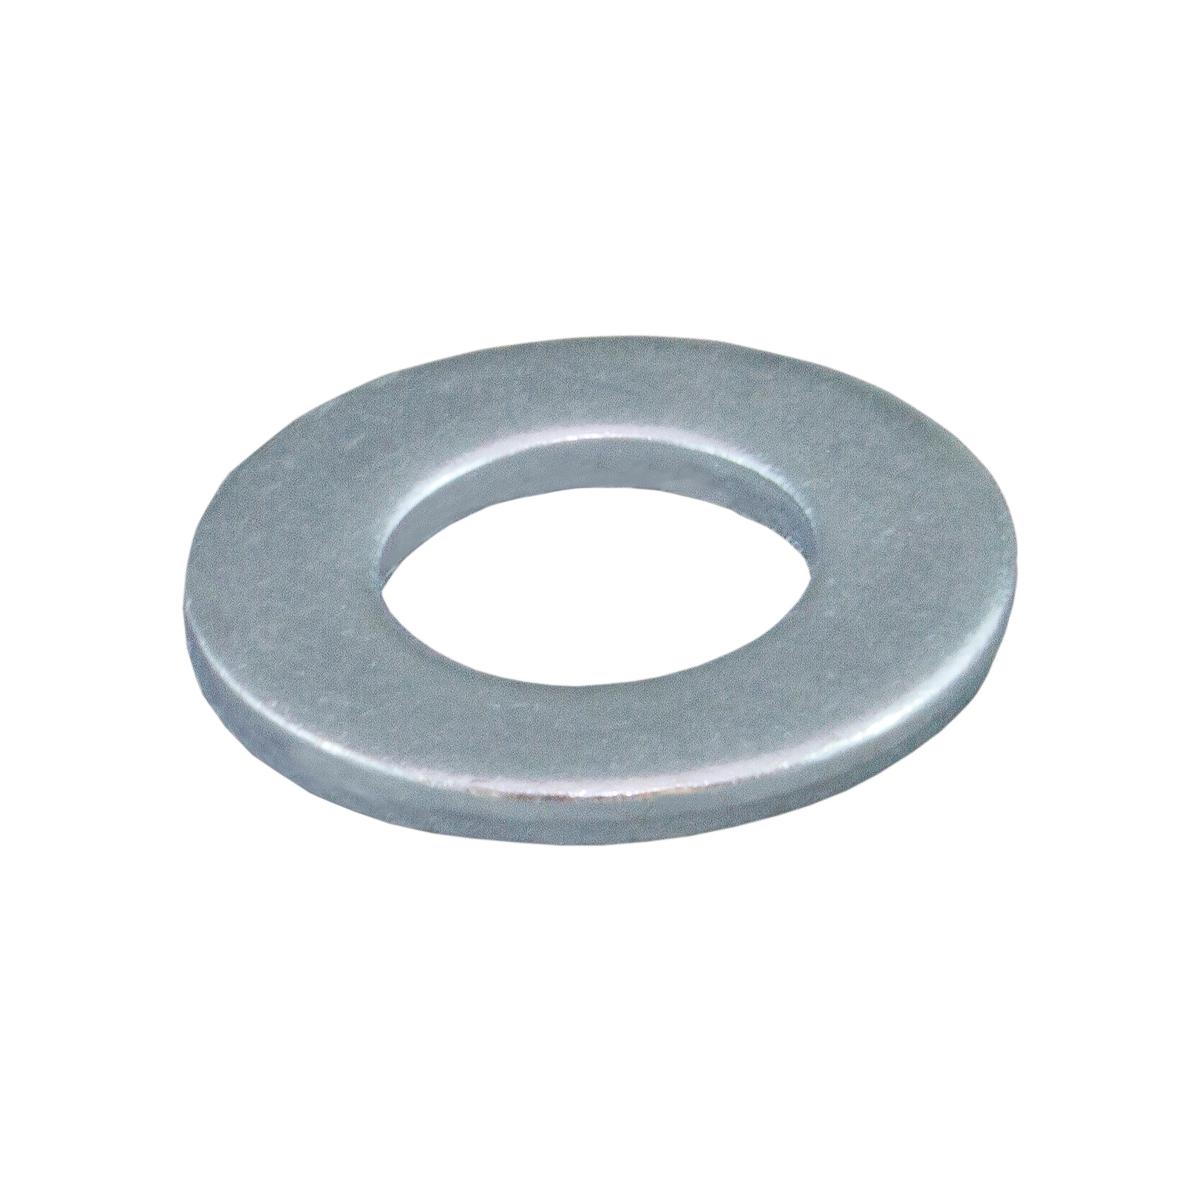 FLAT WASHER M12 STAINLESS STEEL